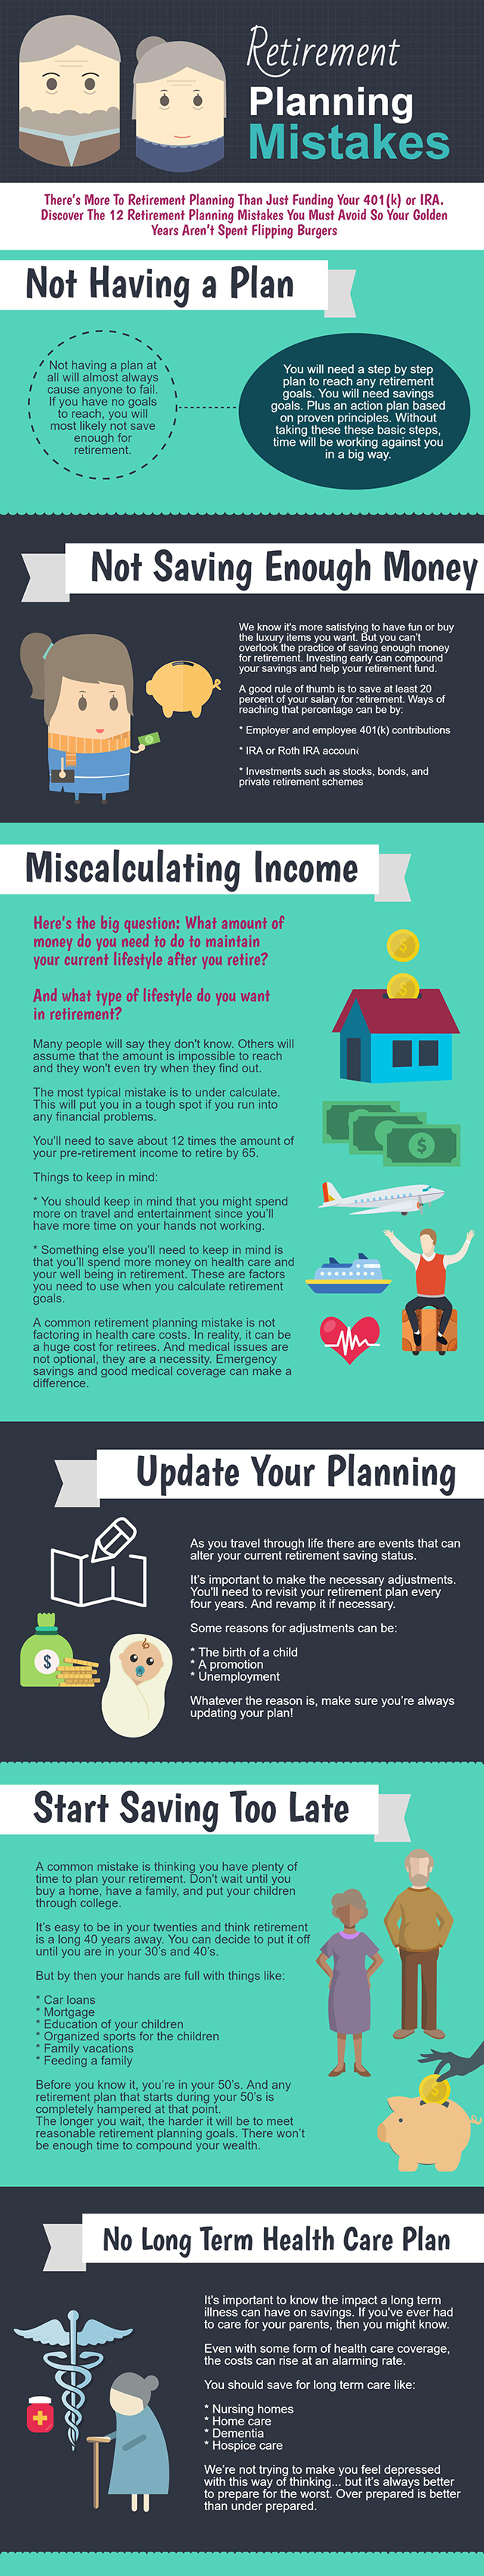 Retirement Planning Mistakes - Infographic